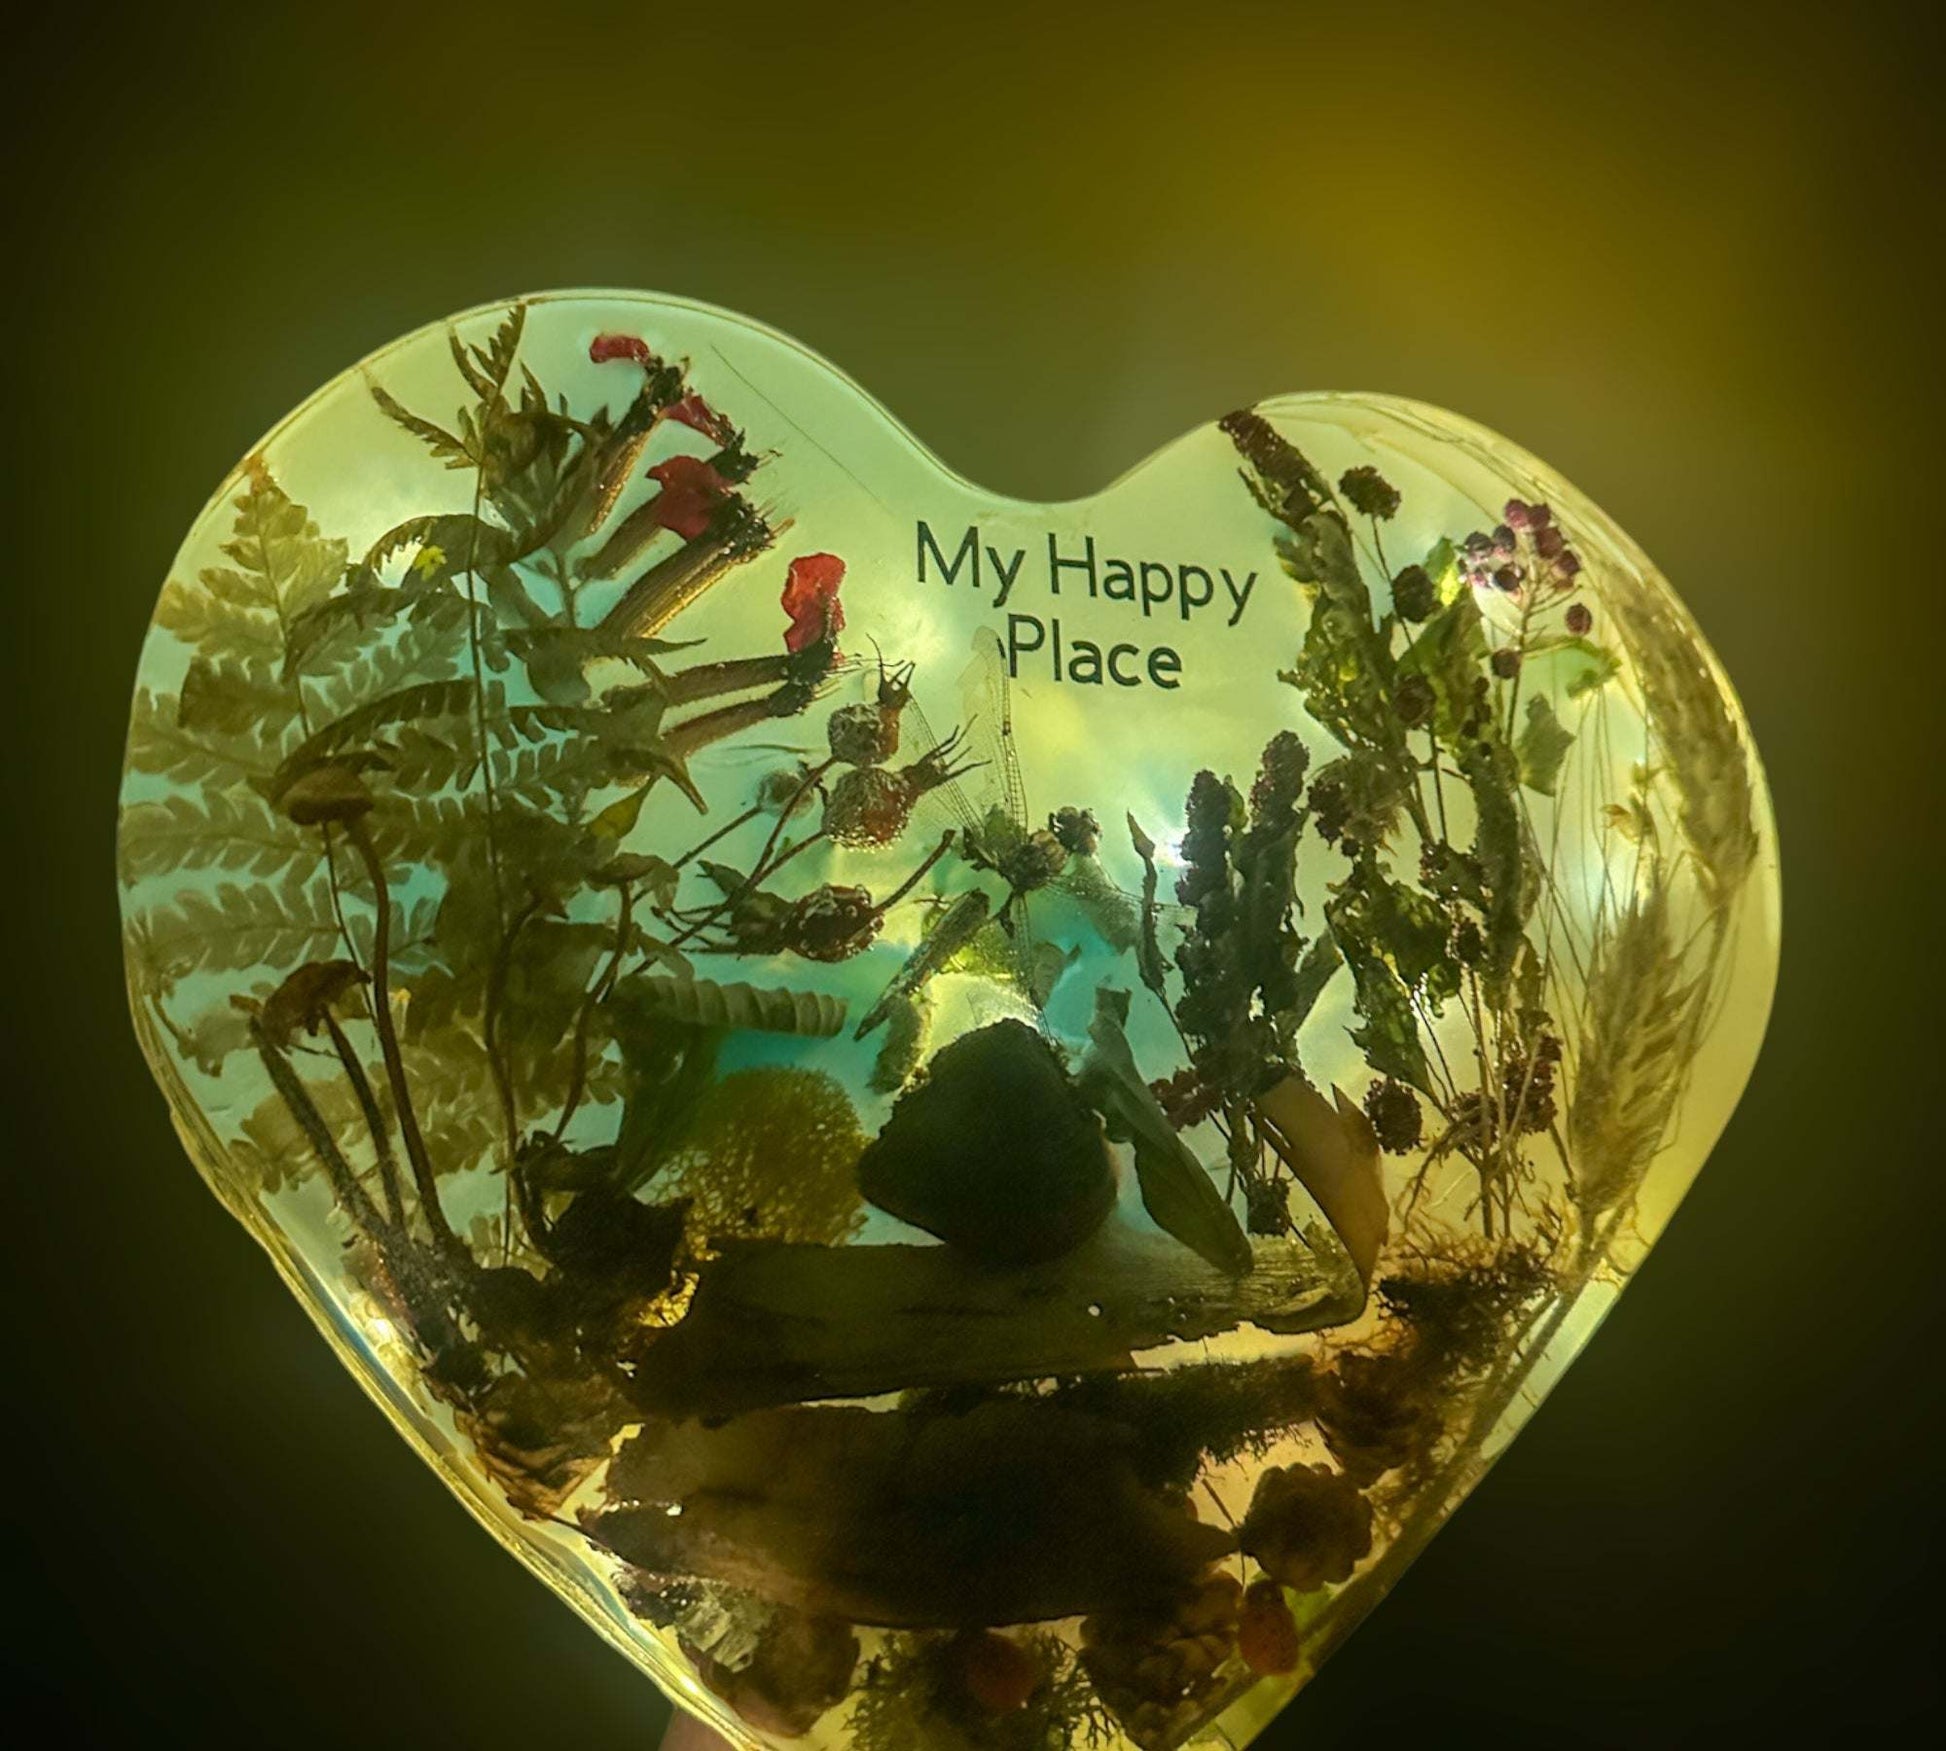 Botanical Wall Art "My Happy Place" Enchanted Serenity with LED Lights